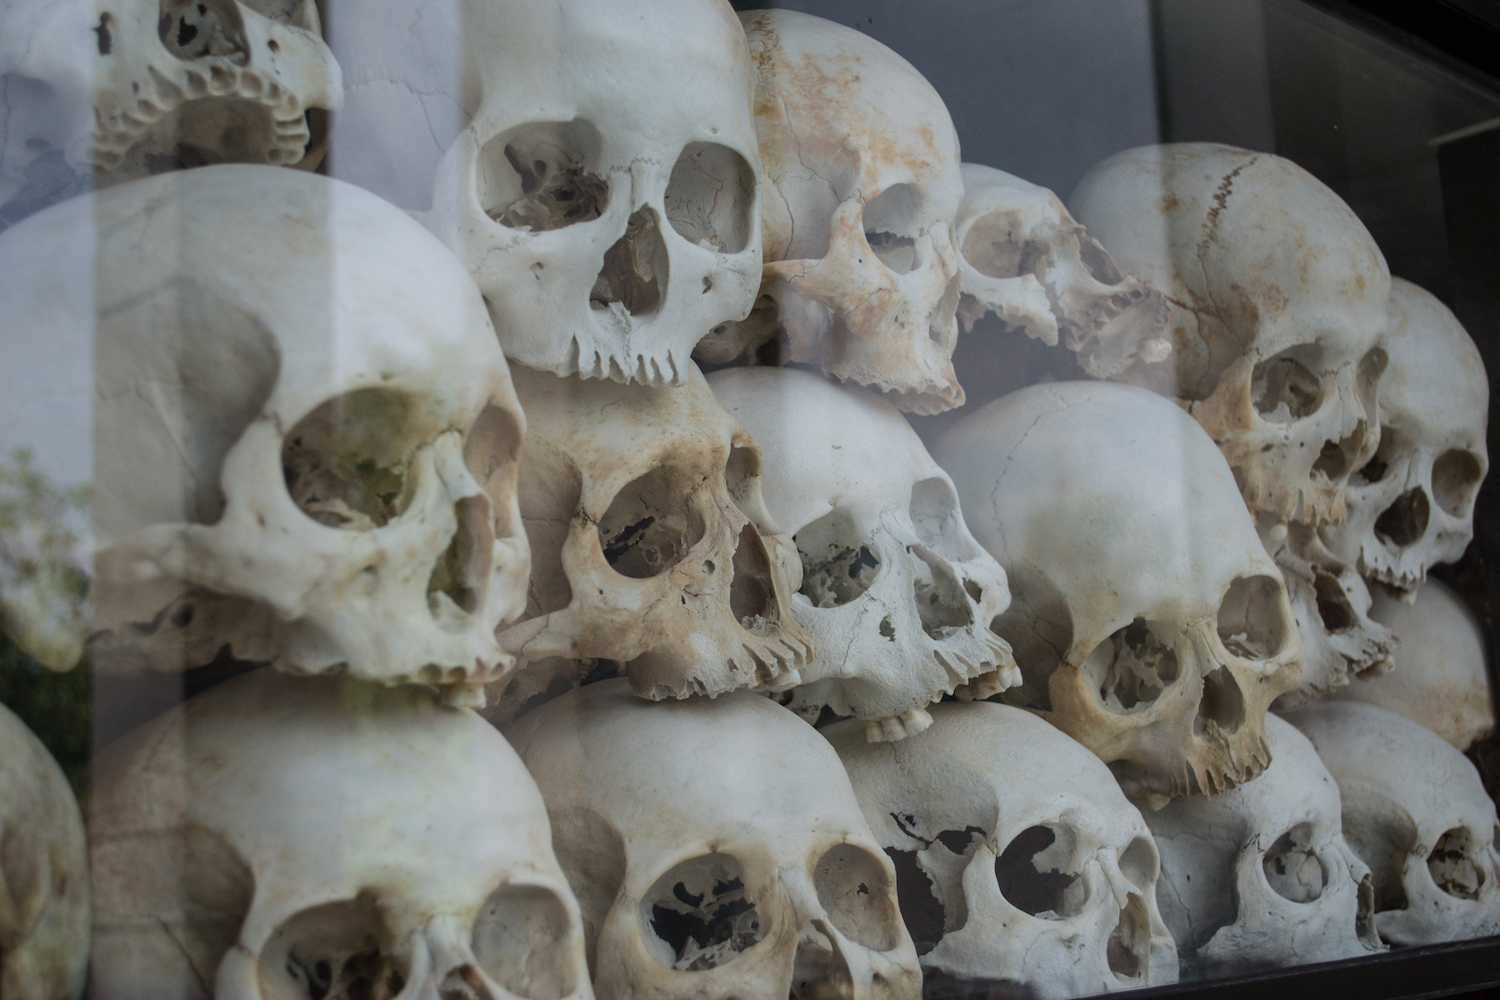 Skulls seen through the glass at the Killing Fields in Phnom Penh, Cambodia.